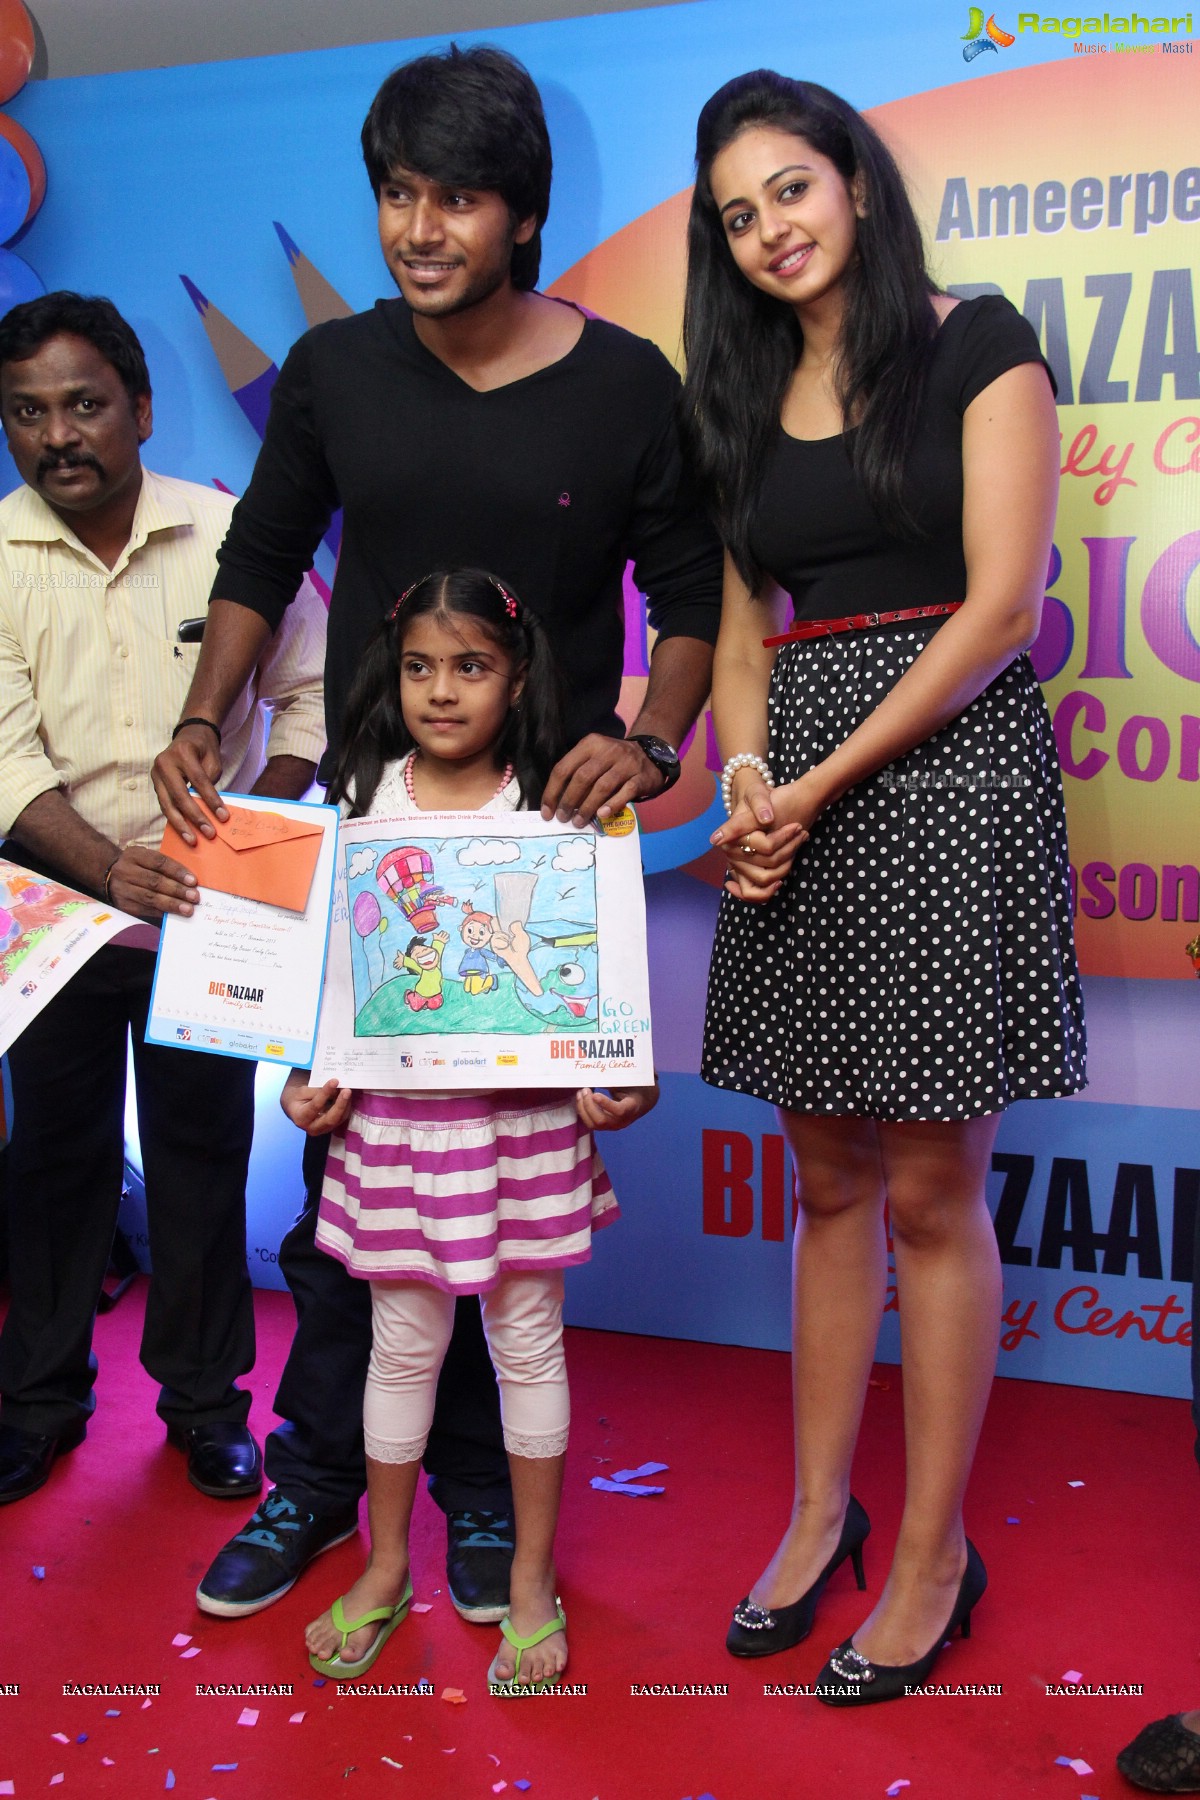 The Biggest Drawing Competition by Big Bazaar